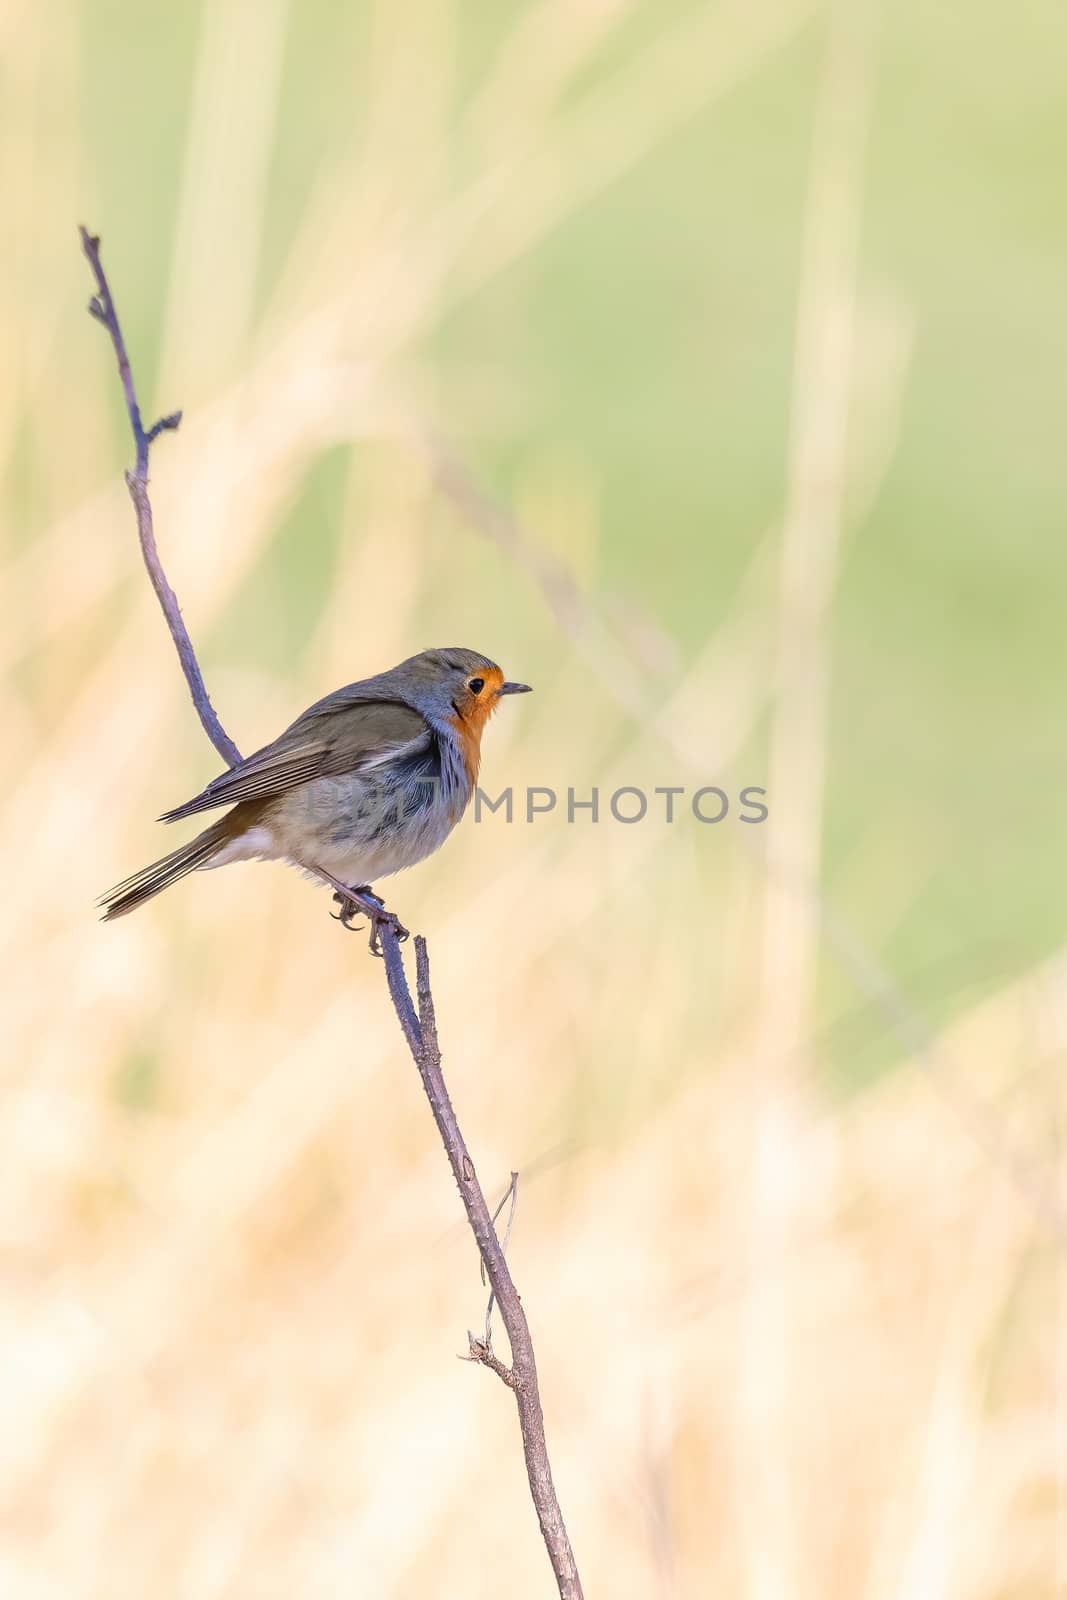 small songbird European Robin Red Breast perched on twig in spring time. Beautiful bokeh background. European bird wildlife, czech republic